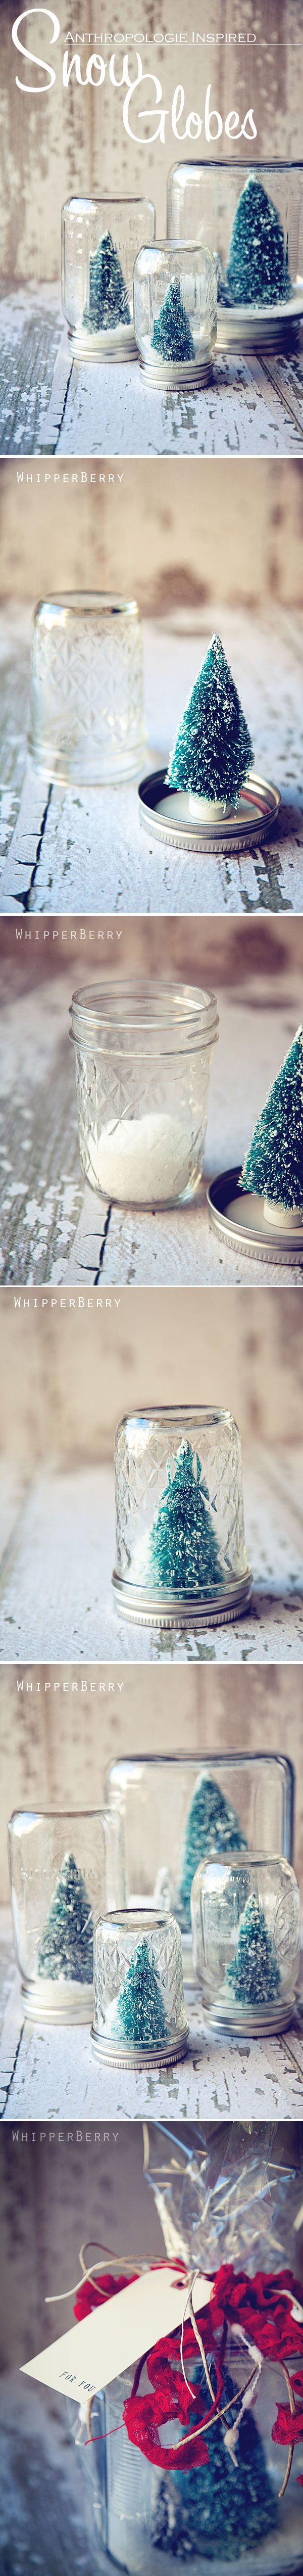 Inspired Snow Globes Tutorial